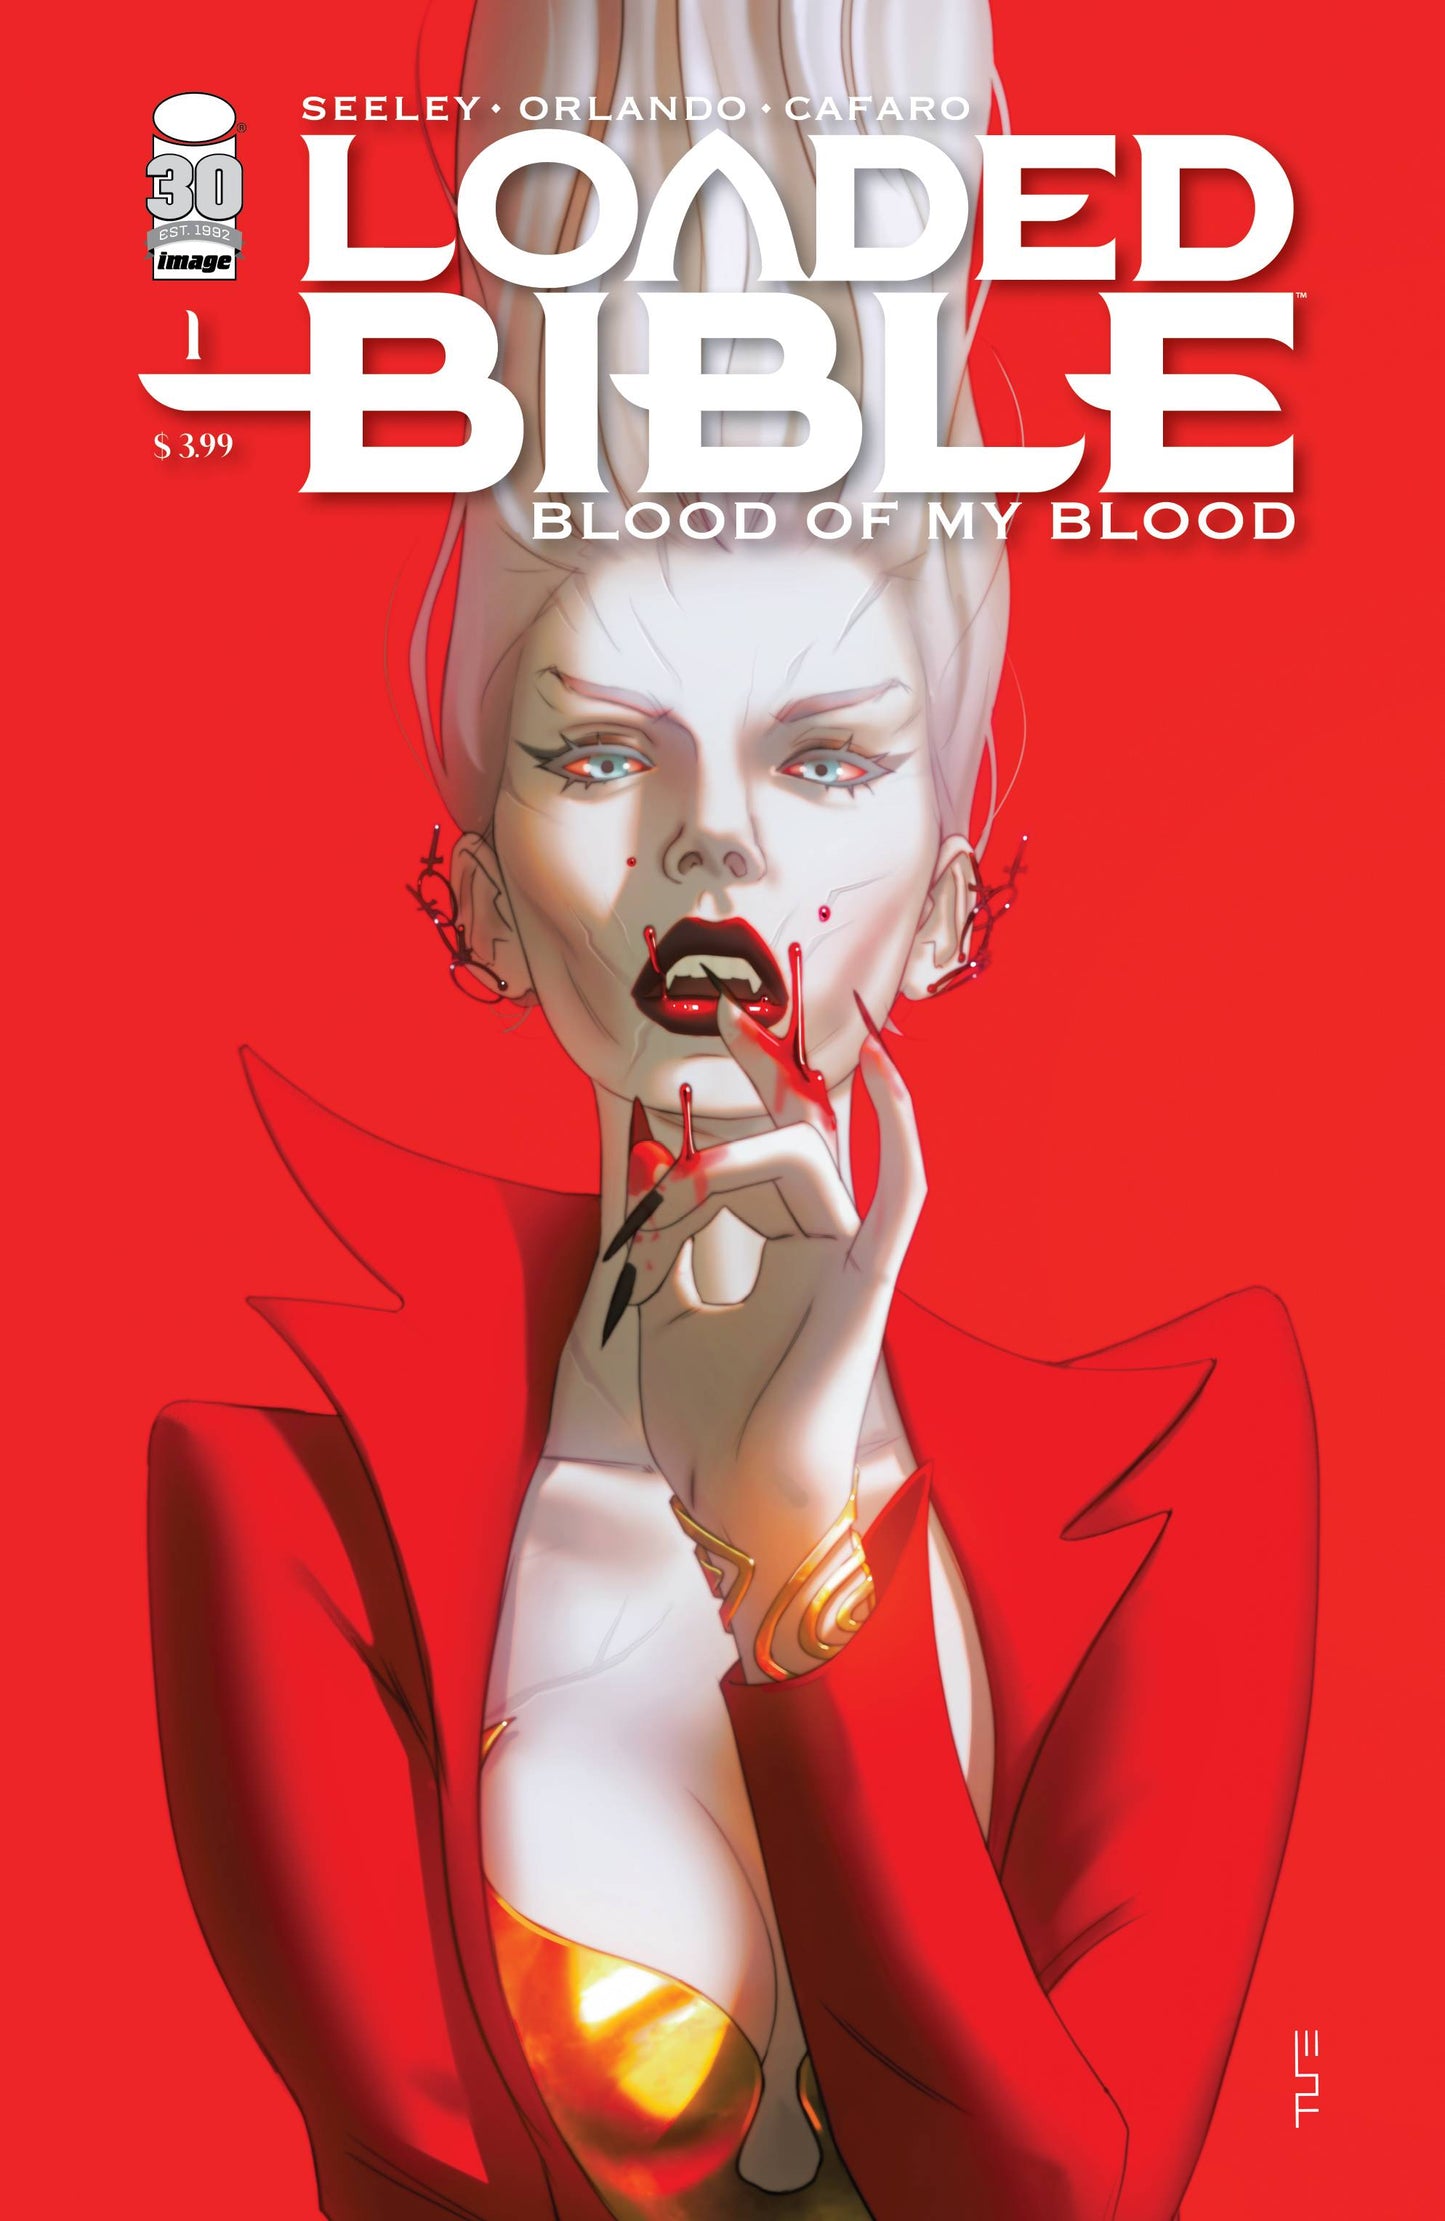 Loaded Bible Blood Of My Blood #1 C (Of 6) Scott Forbes Variant GGA (Mr) (03/02/2022) Image